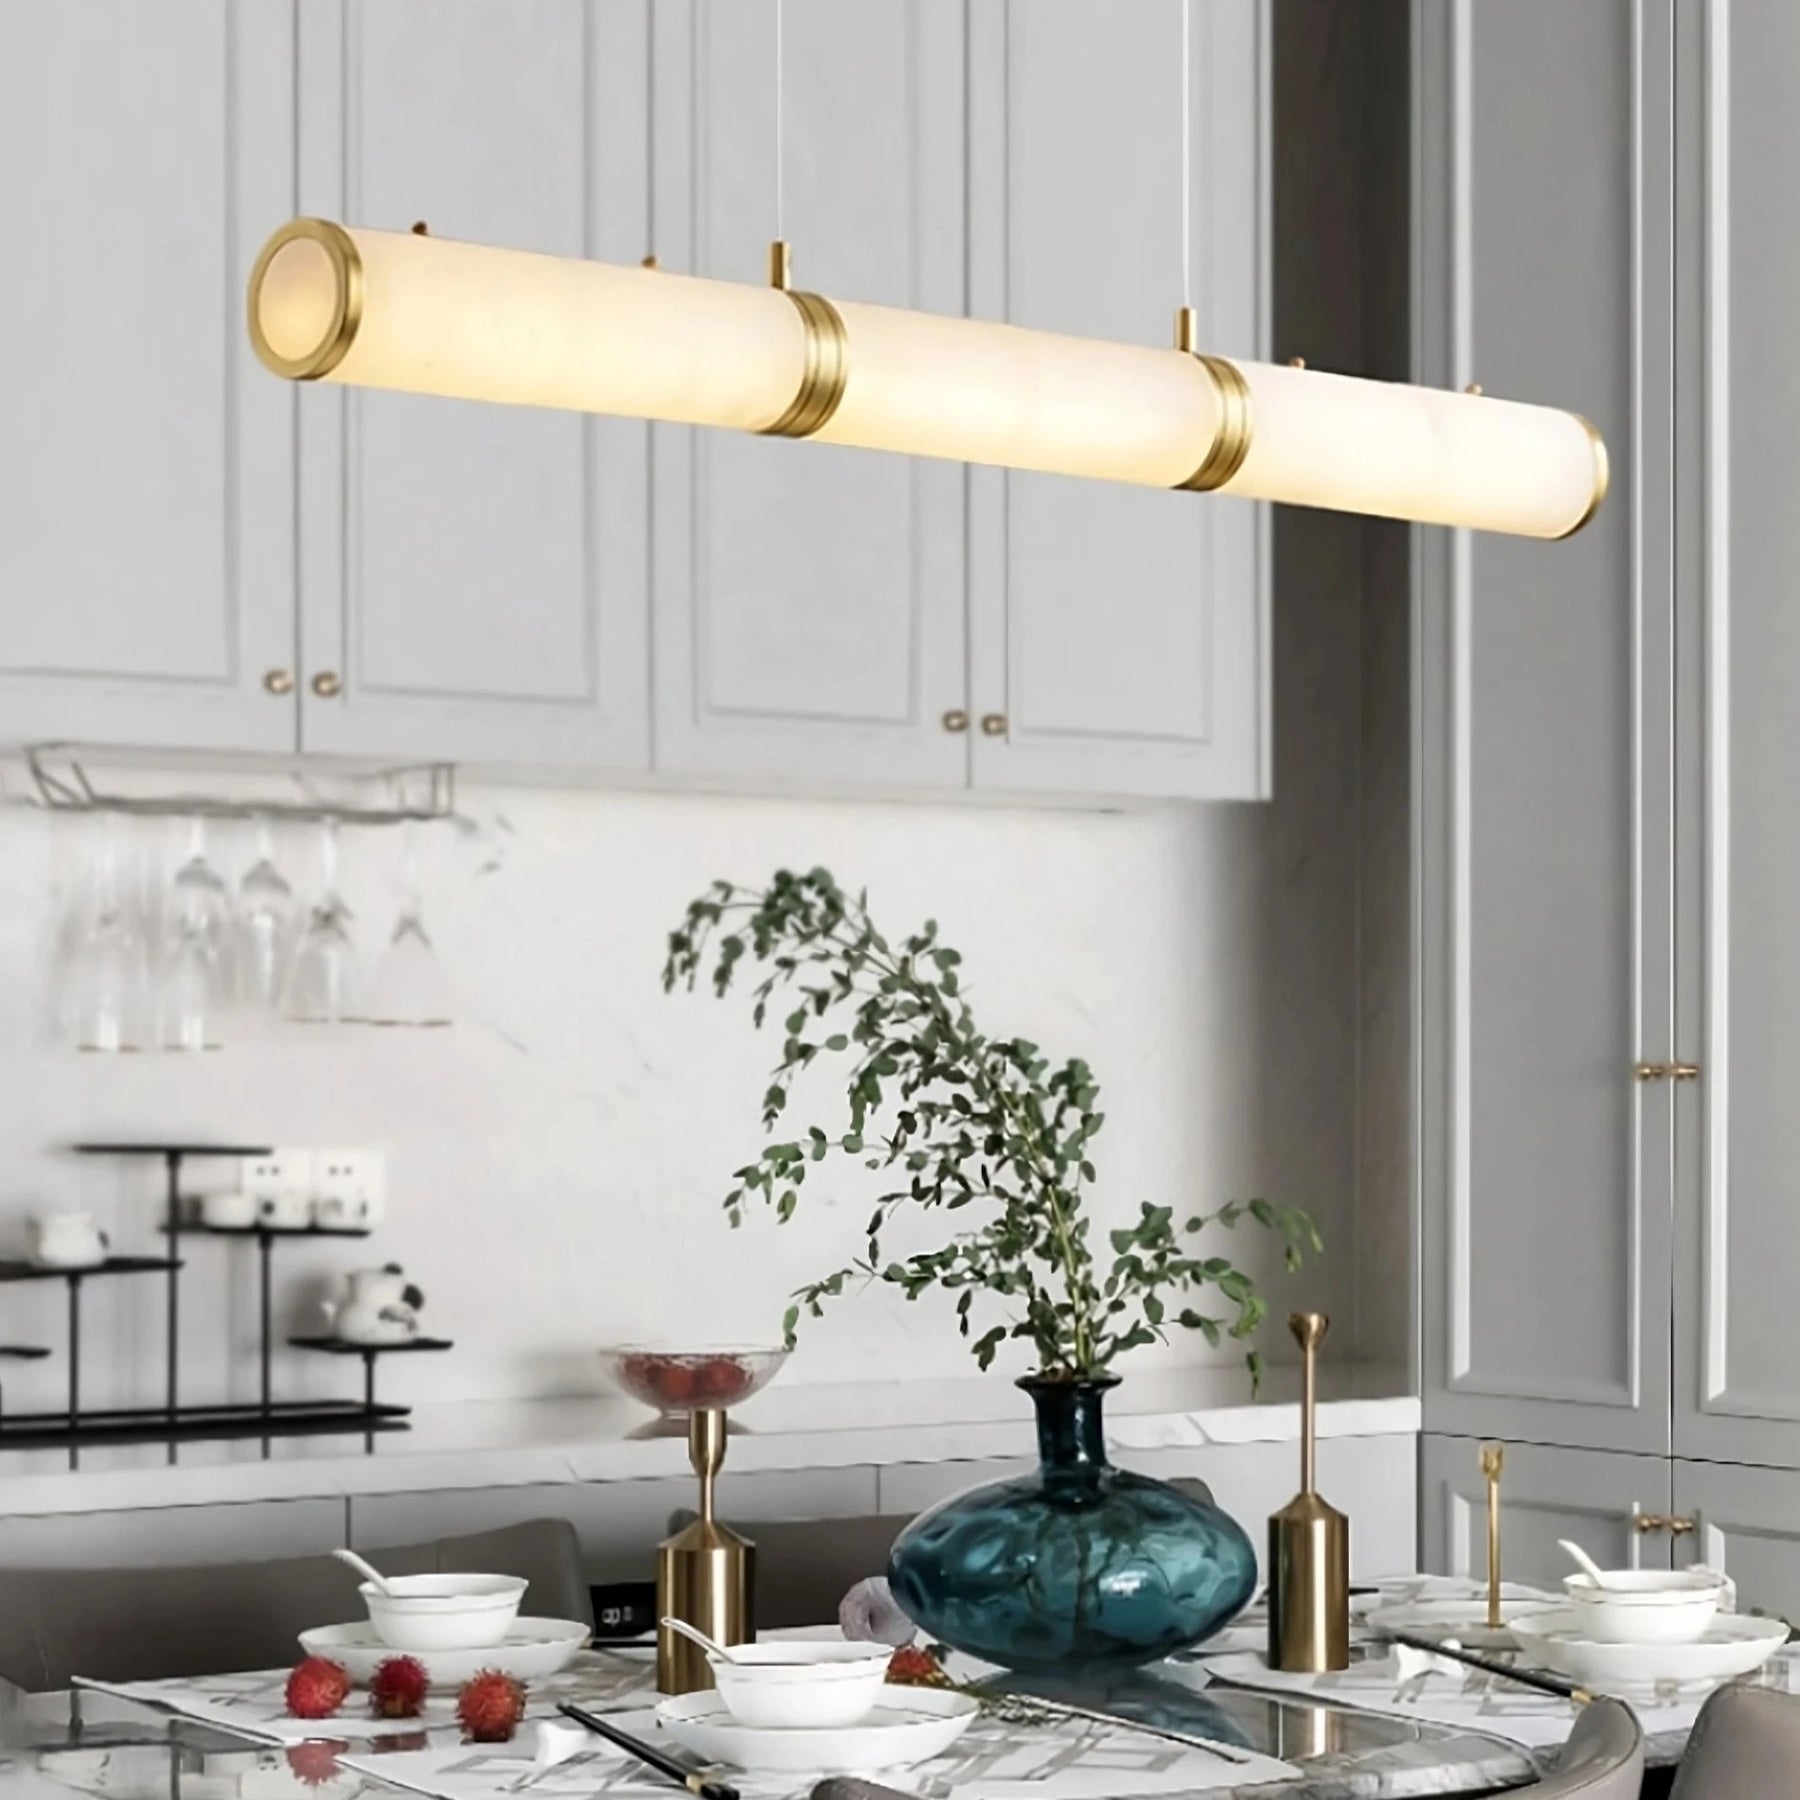 Moonshade Natural Marble Dining Room Lighting Fixture